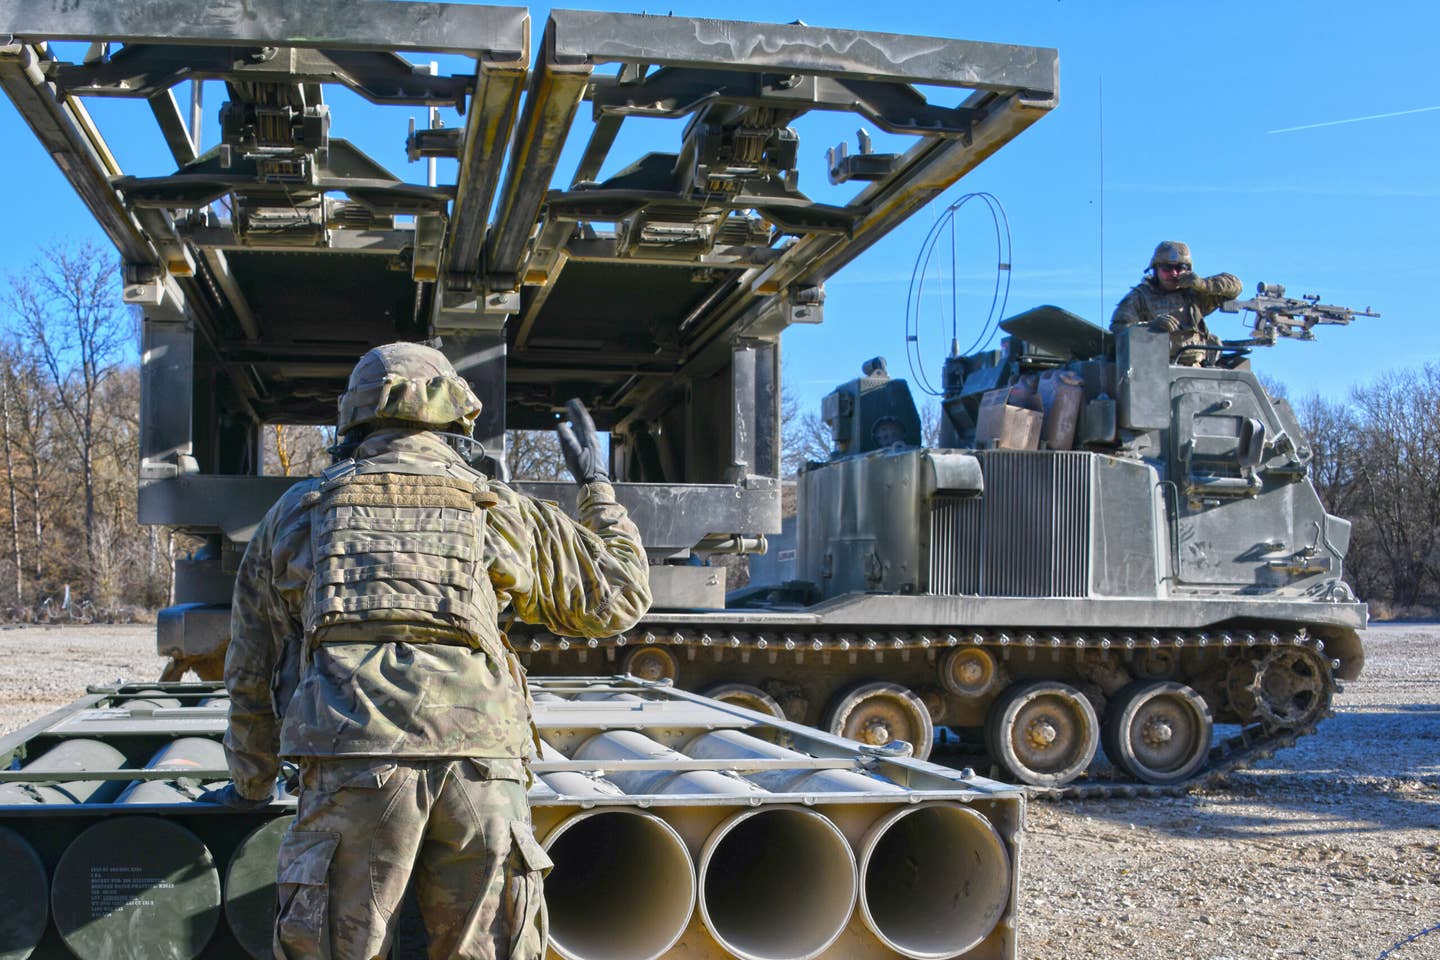 U.S. Soldiers load an M270 Multiple Launch Rocket System at Grafenwoehr Training Area, Germany, in March. <em>U.S. Army photo by Gertrud Zach</em>